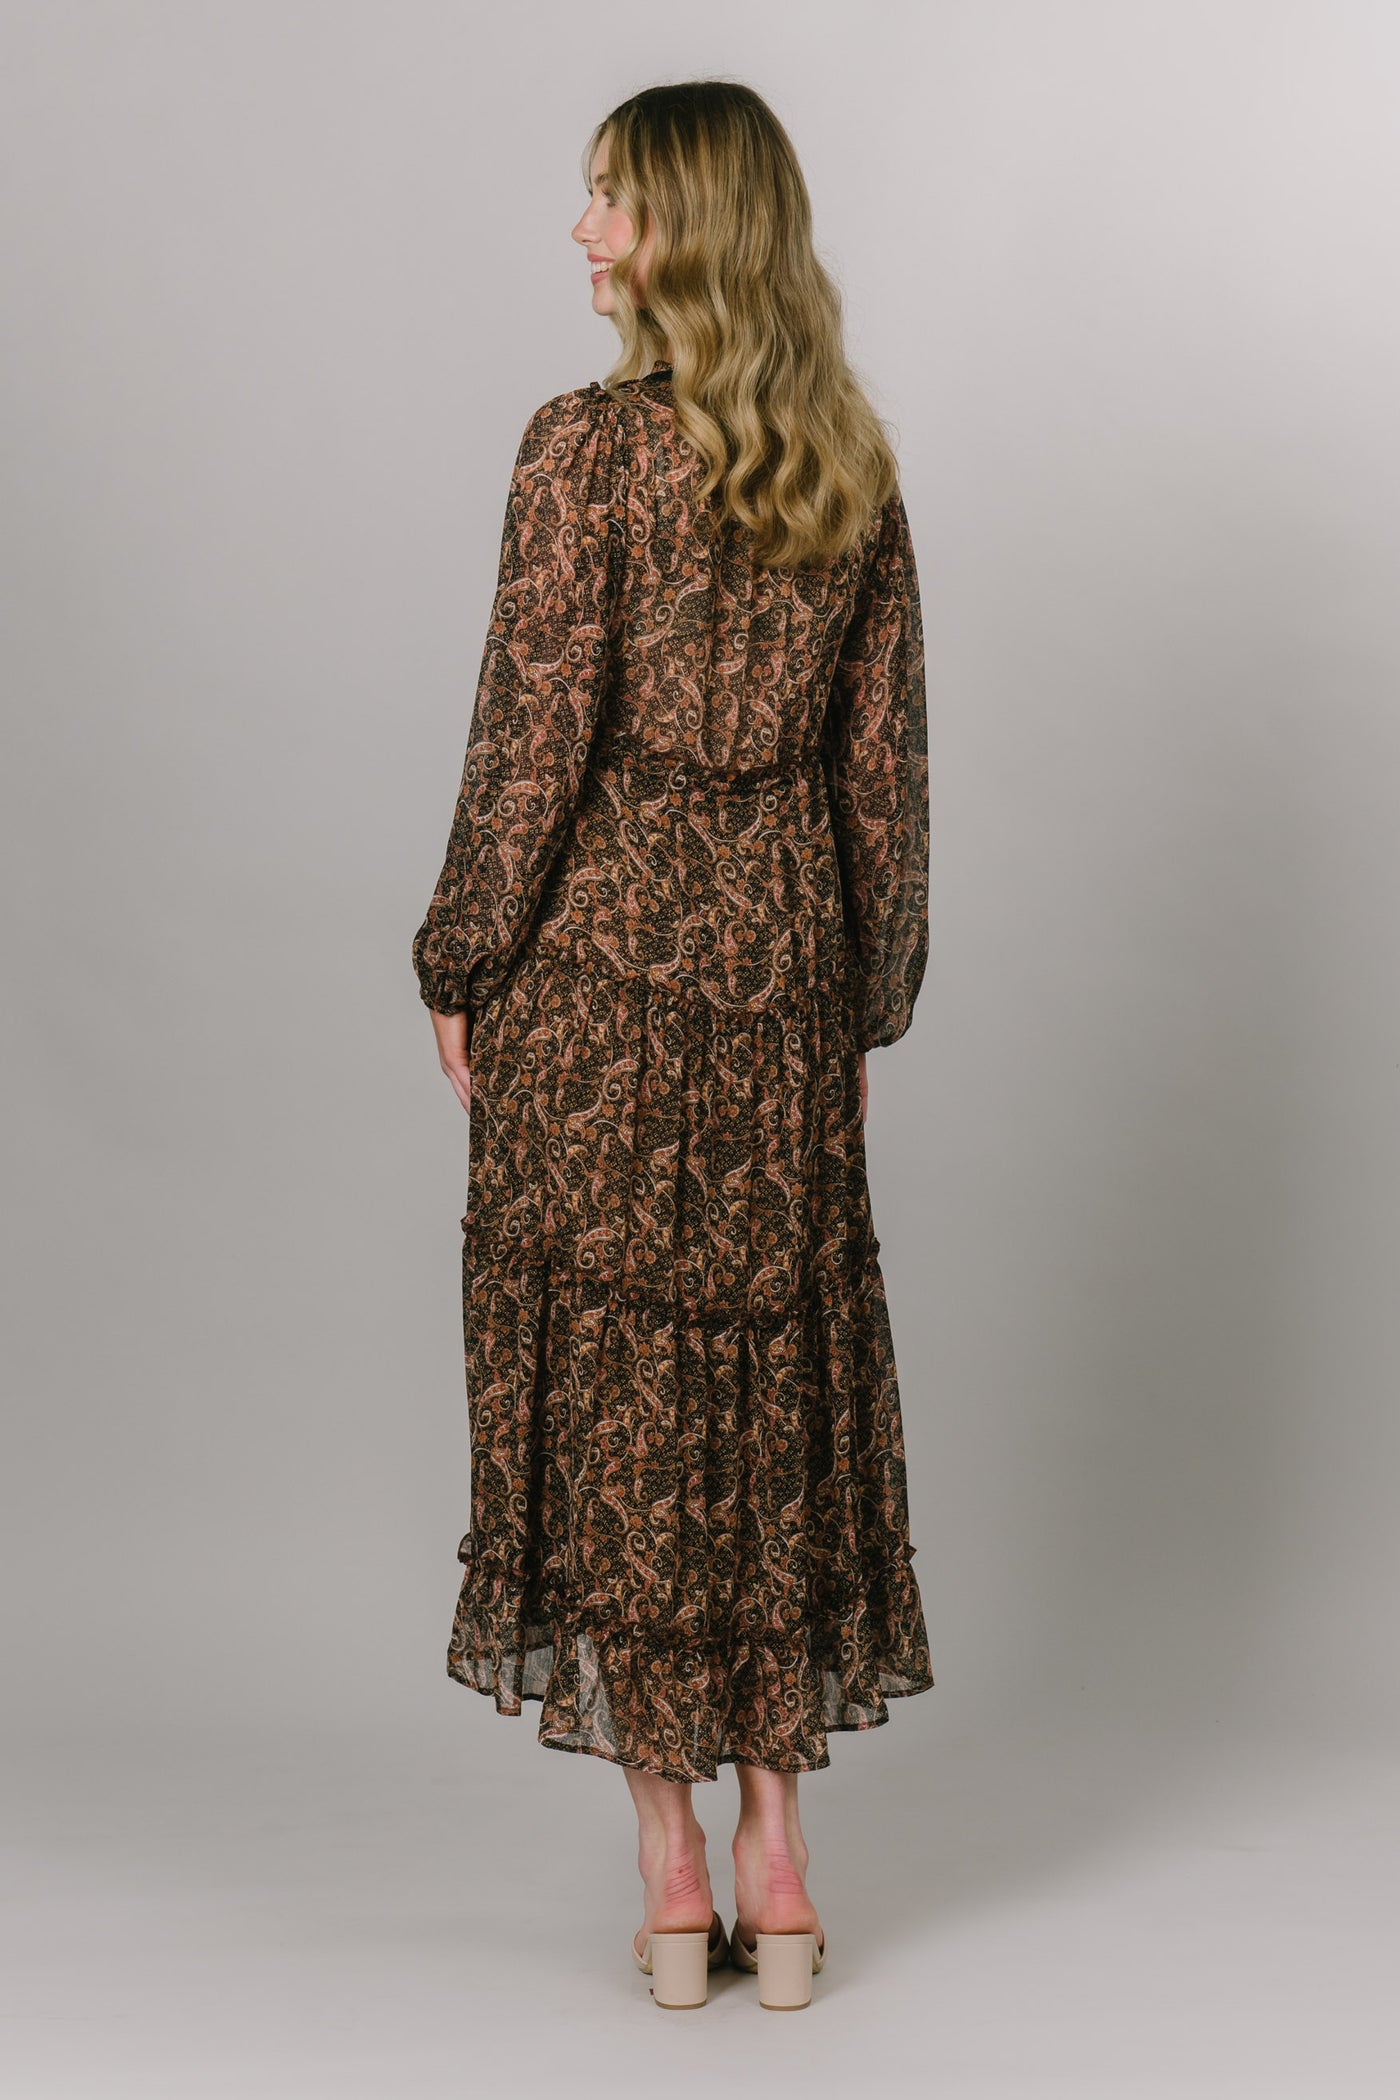 Tiered midi dress with a paisley pattern. Modest Dresses - Everyday Dresses - Modest Prom Dress - Formalwear Modest Dresses - Bridesmaid Modest Dresses.